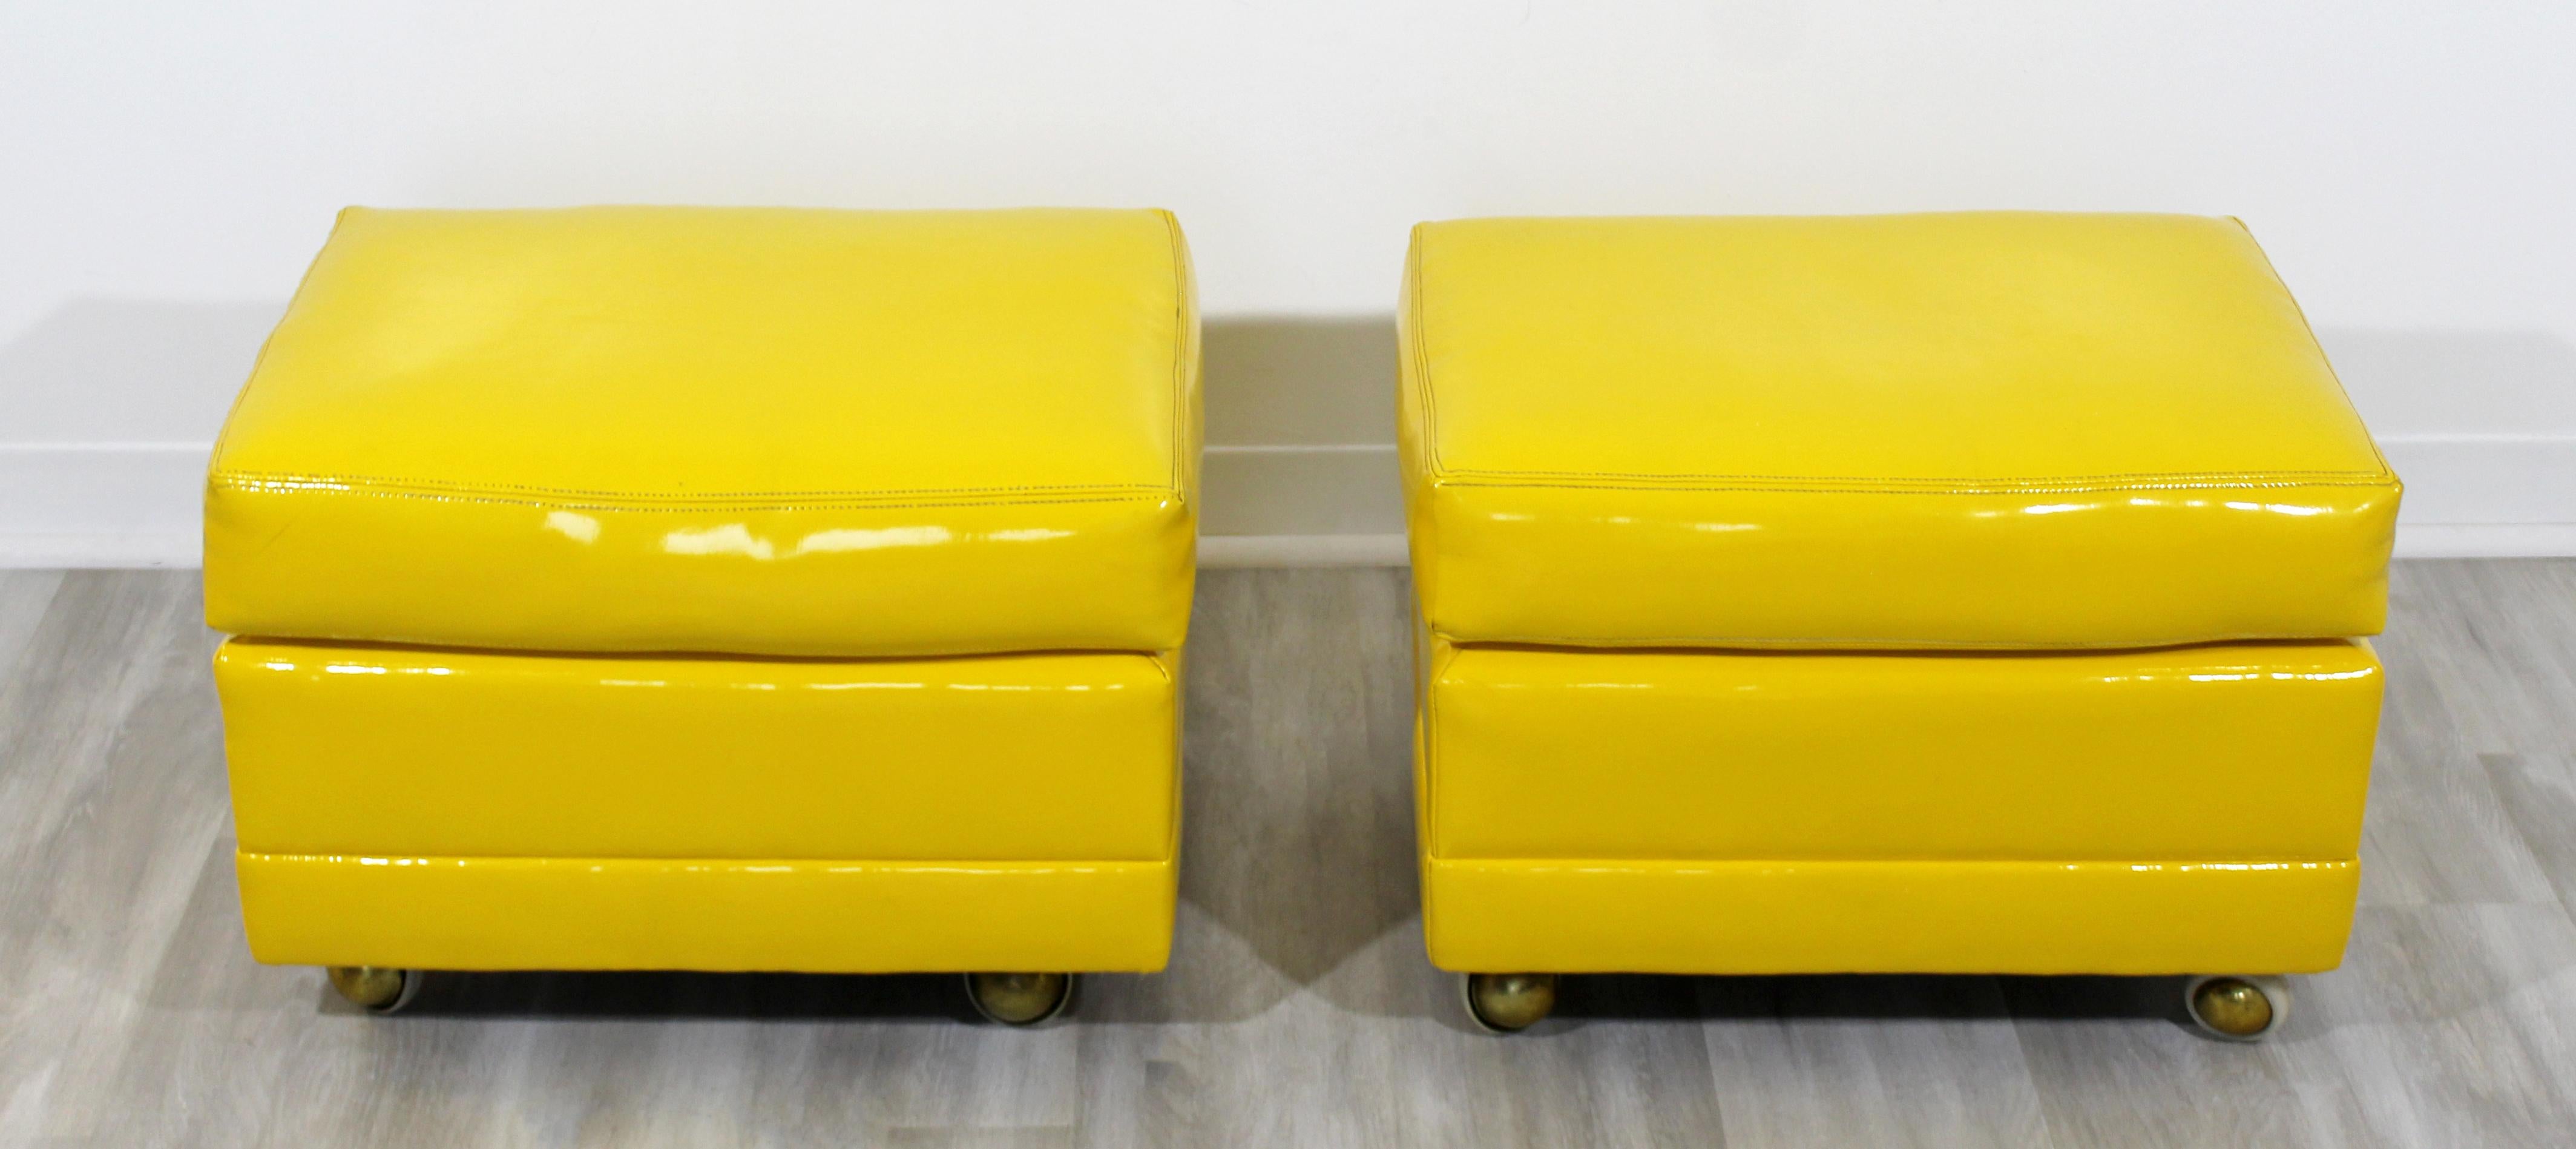 For your consideration is a slick pair of ottomans or seats on casters, upholstered in yellow patent leather vinyl, circa 1970s. In excellent vintage condition. The dimensions are 22